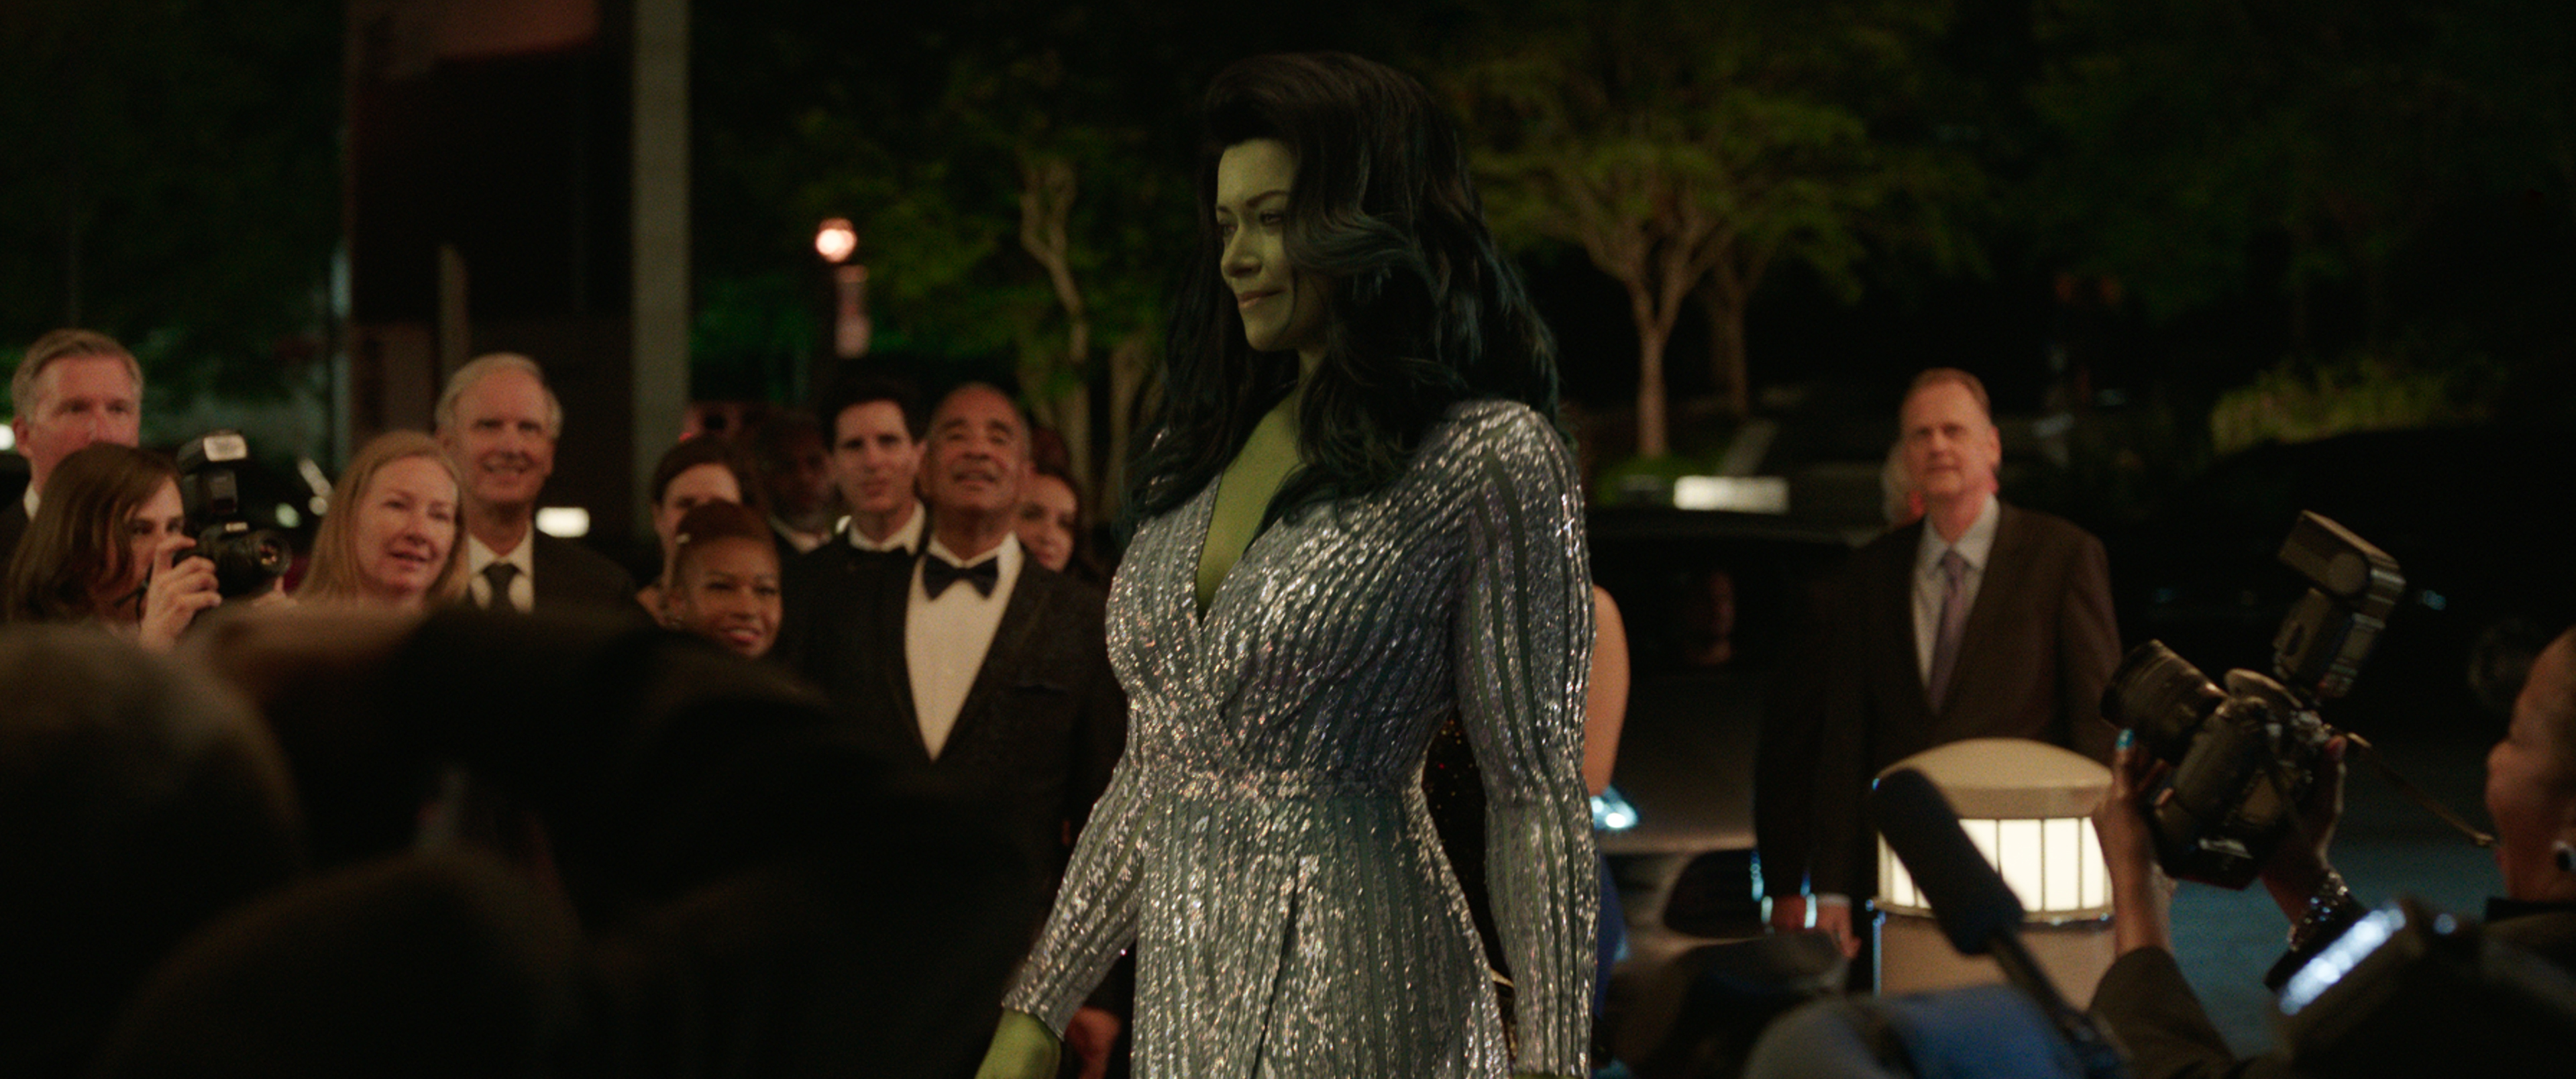 Marvel Studios have released the latest trailer for the upcoming Disney+ series She-Hulk: Attorney At Law, which premiered during the Marvel panel in Hall H at San Diego Comic Con.